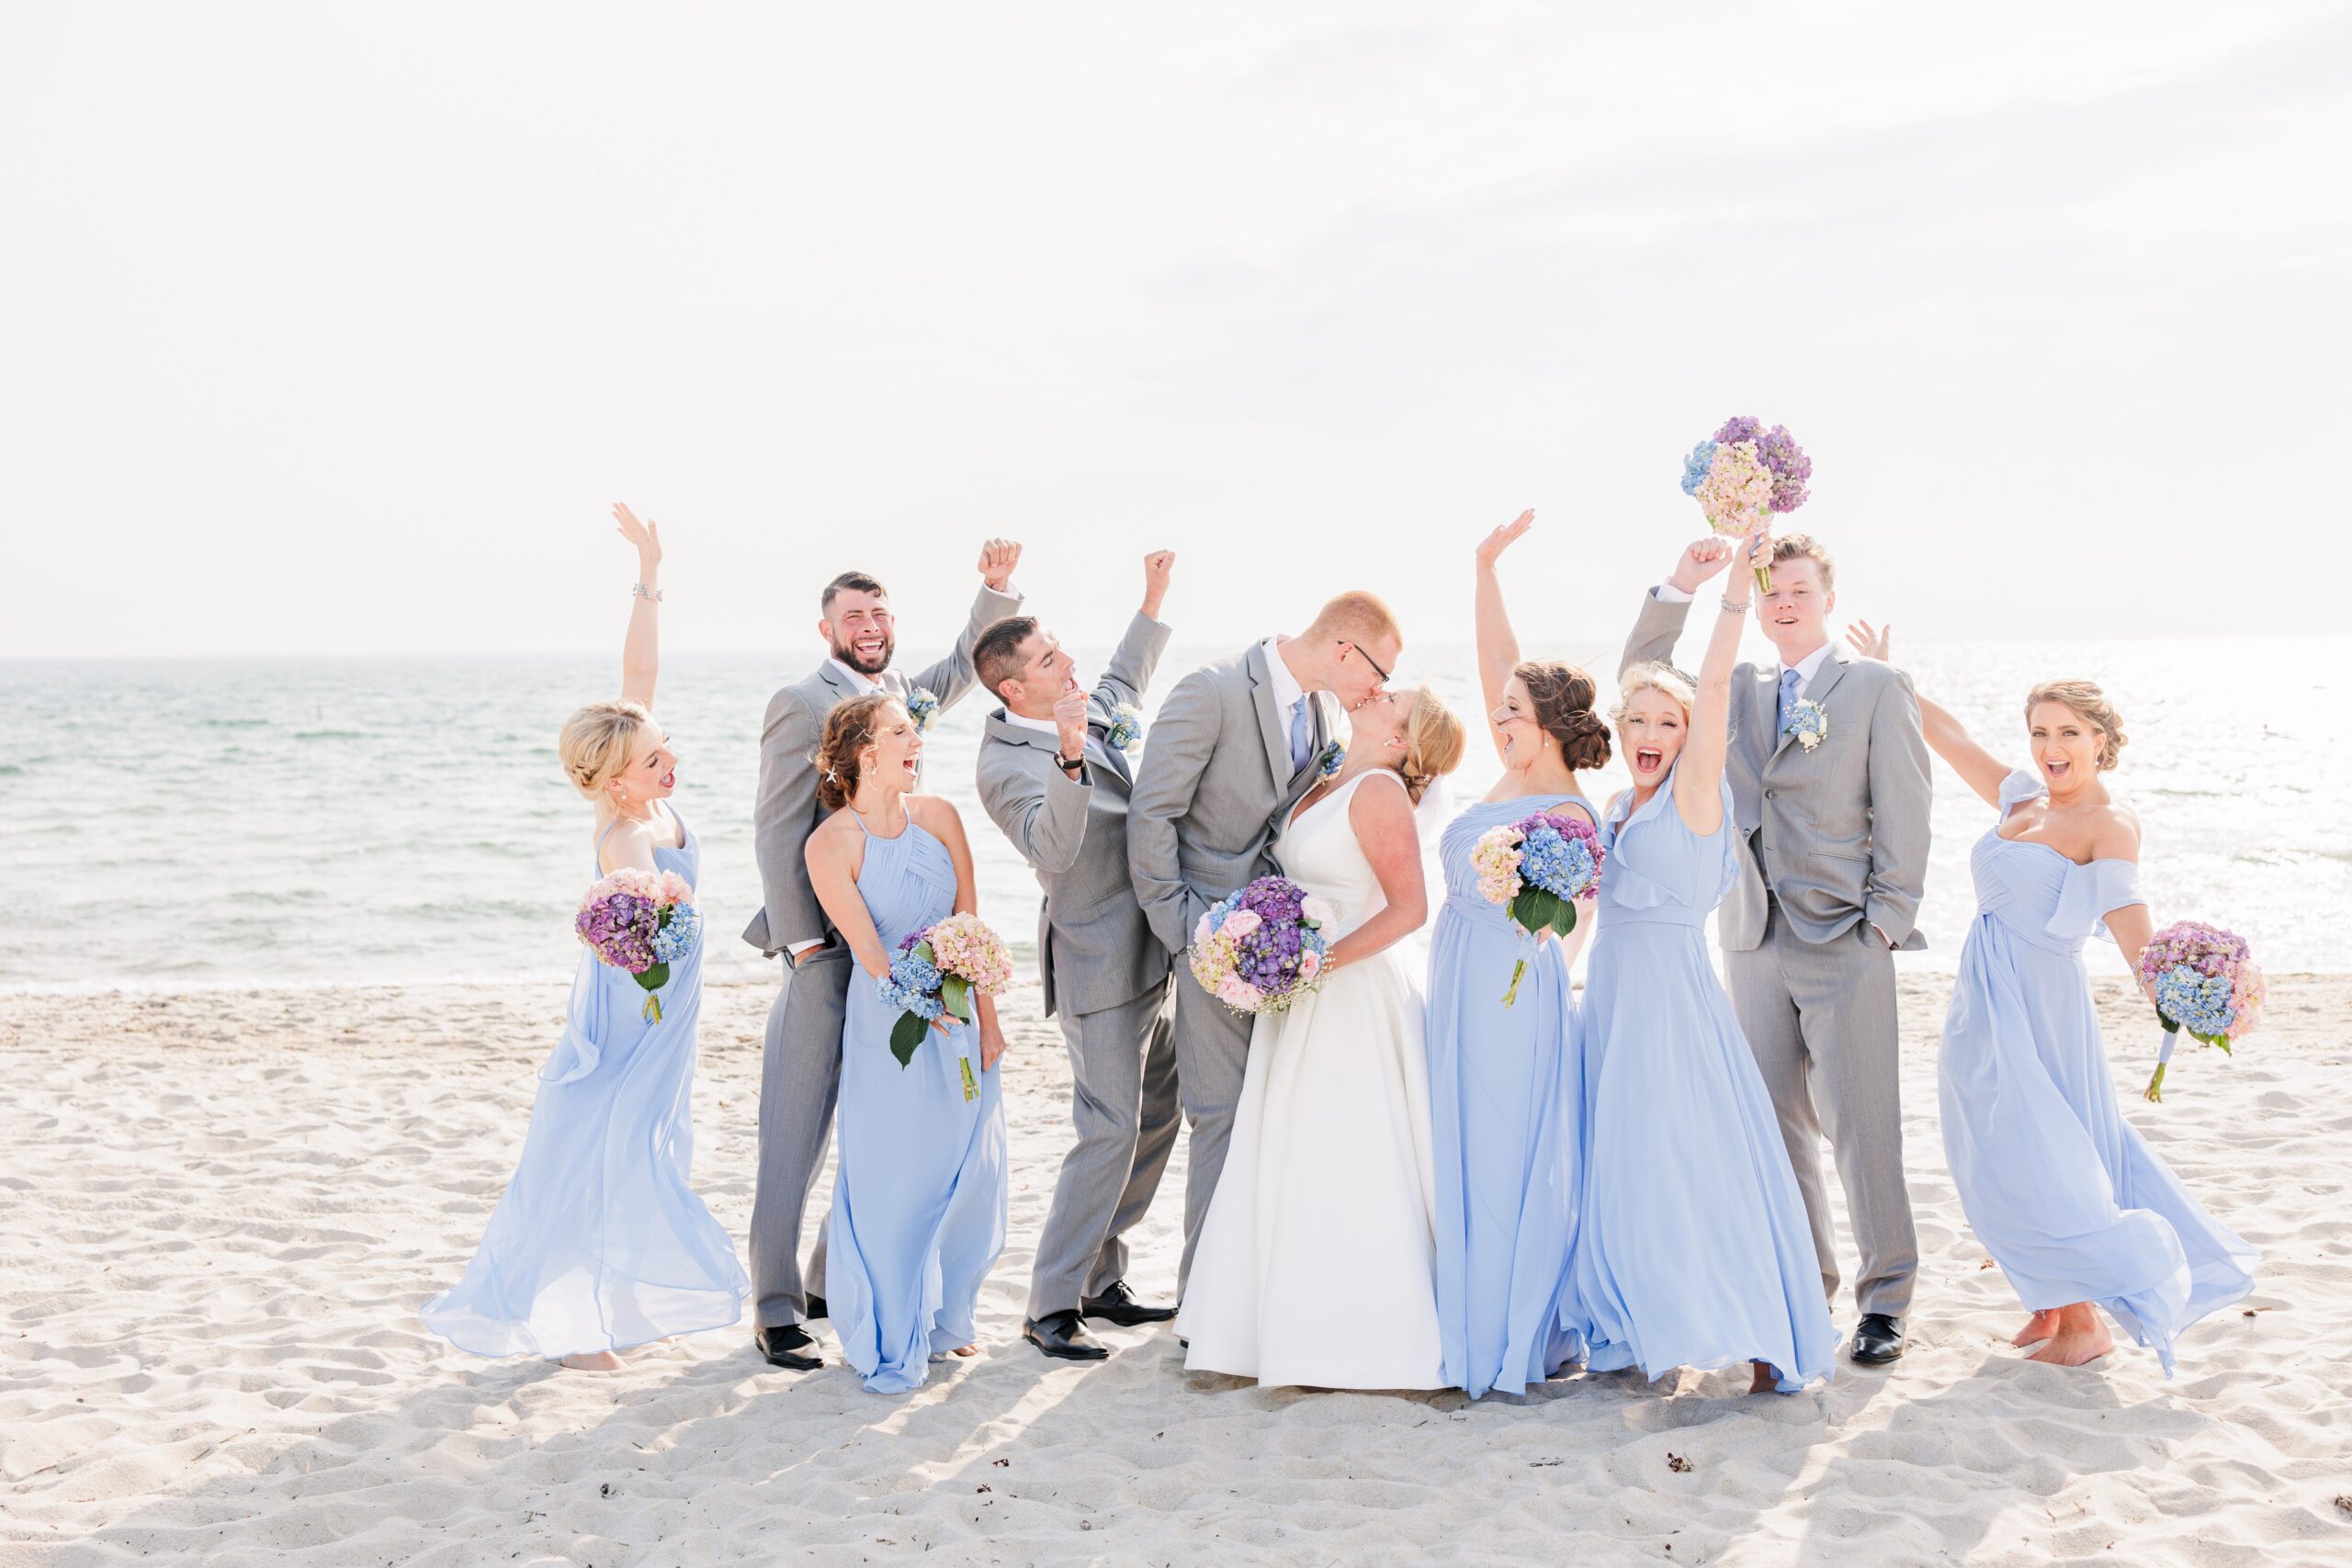 Wedding party cheering while bride and groom kiss on the beach